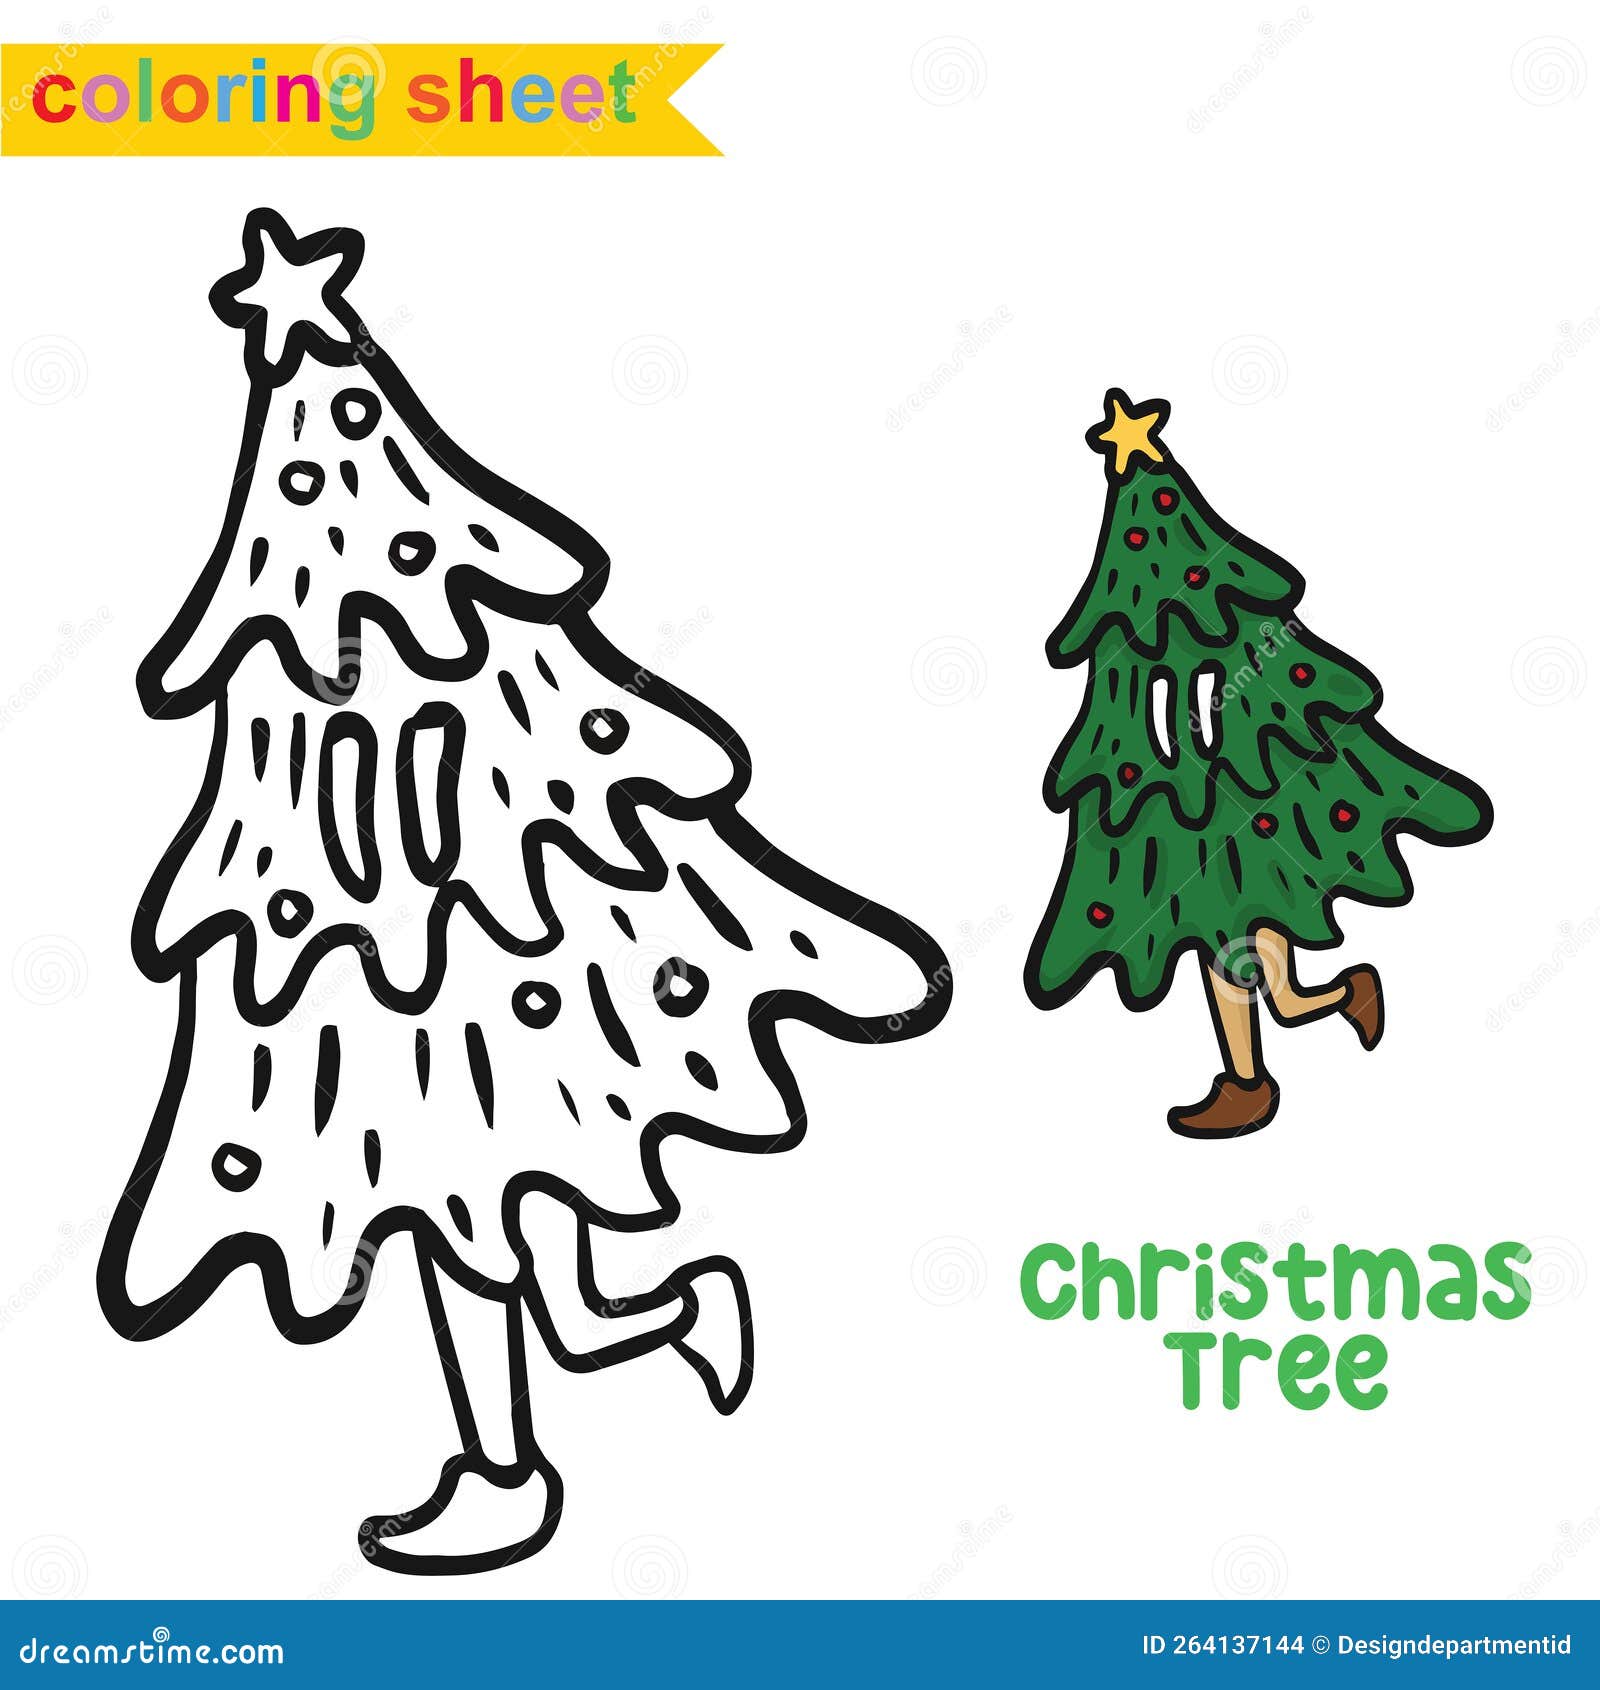 Christmas easy coloring page for kids colouring xmas elements the pine tree stock vector